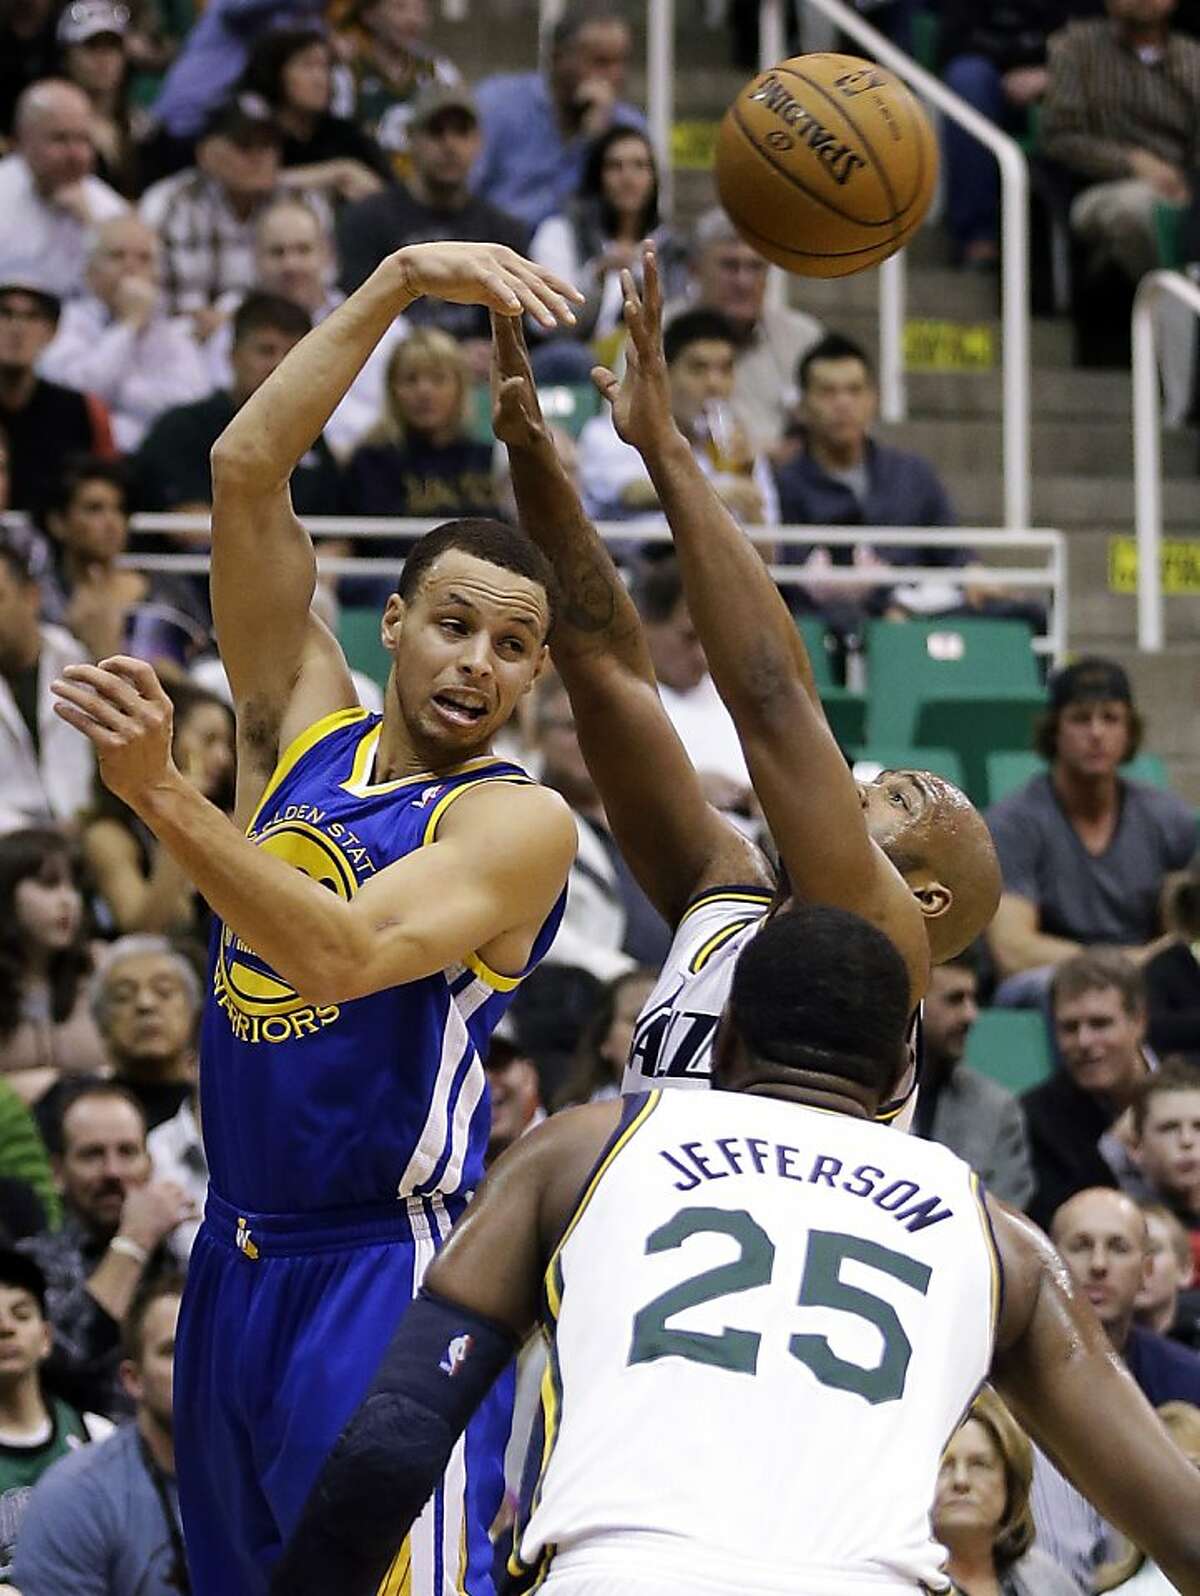 Golden State Warriors' Stephen Curry, left, passes the ball as Utah Jazz's Jamaal Tinsley, rear, defends in the first quarter during an NBA basketball game Tuesday, Feb. 19, 2013, in Salt Lake City. Jazz's Al Jefferson (25) watches the play. (AP Photo/Rick Bowmer)